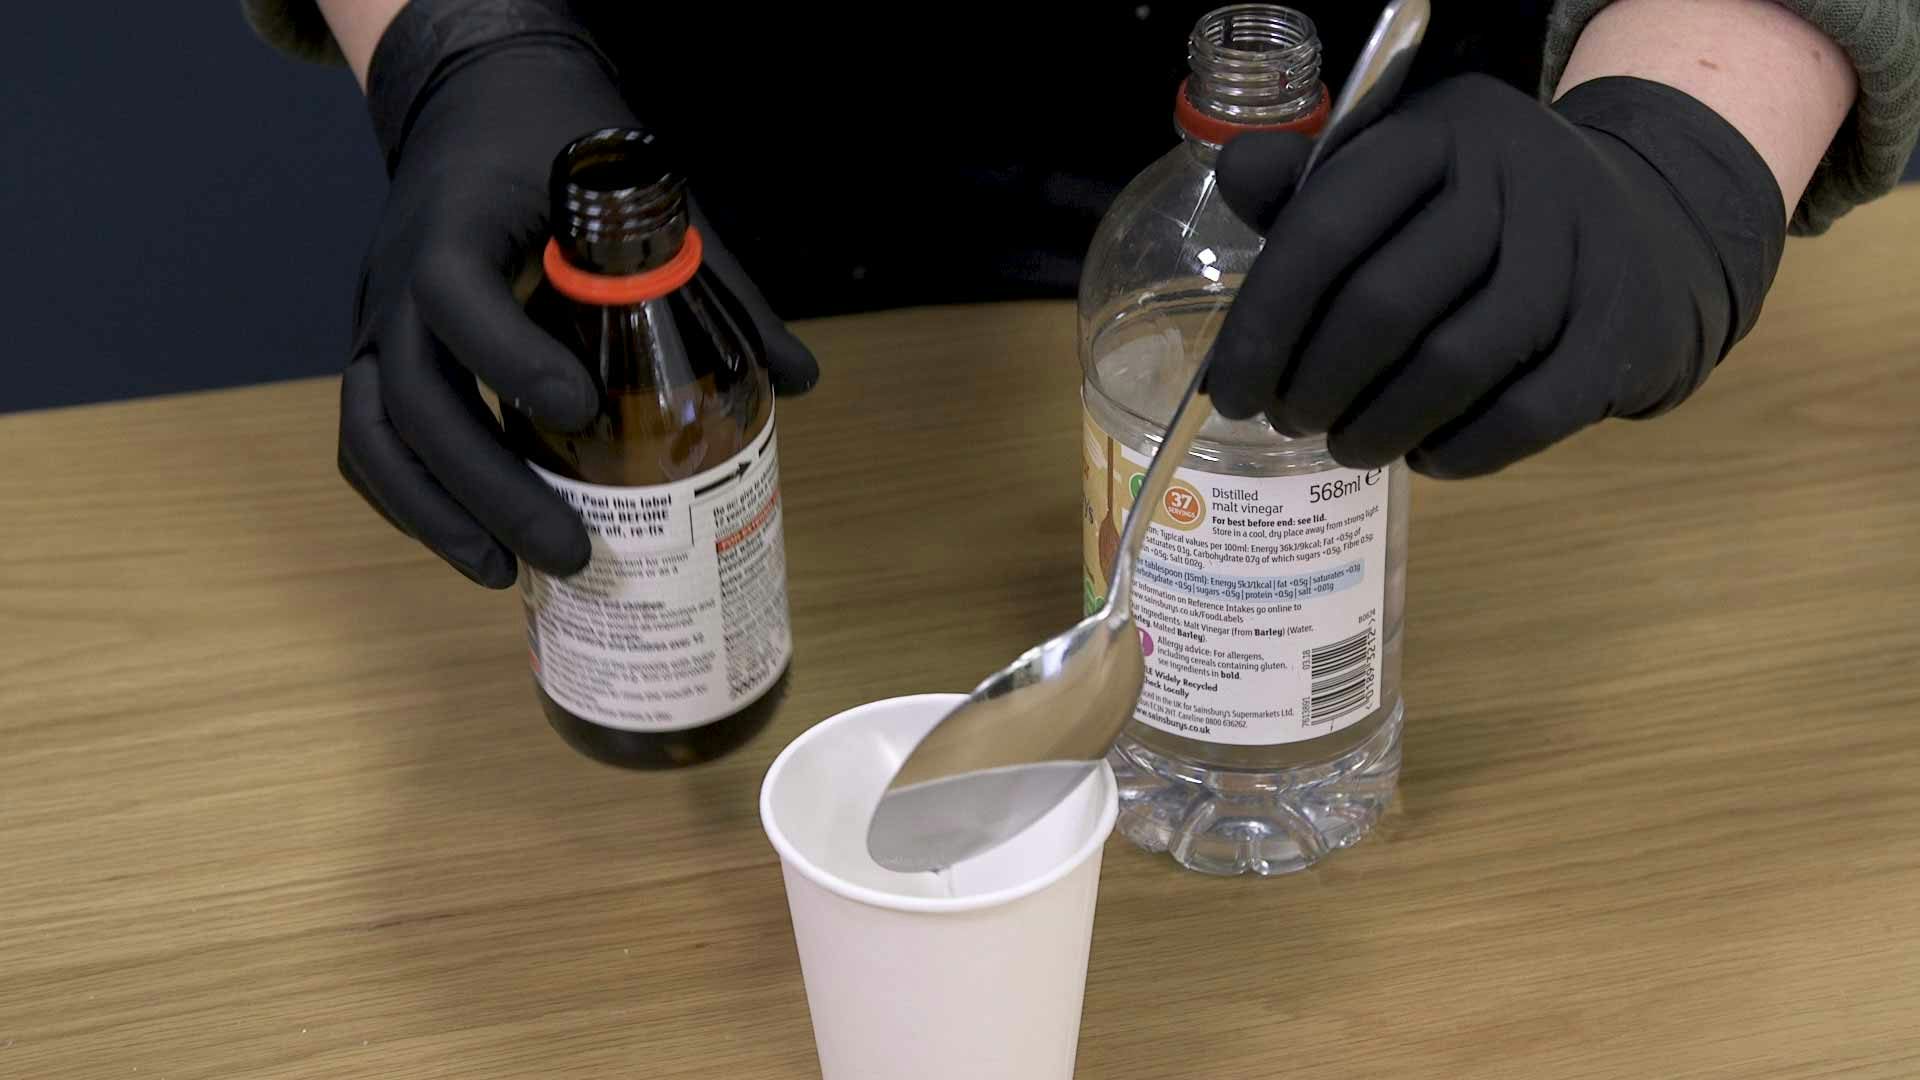 Mixing vinegar and hydrogen peroxide